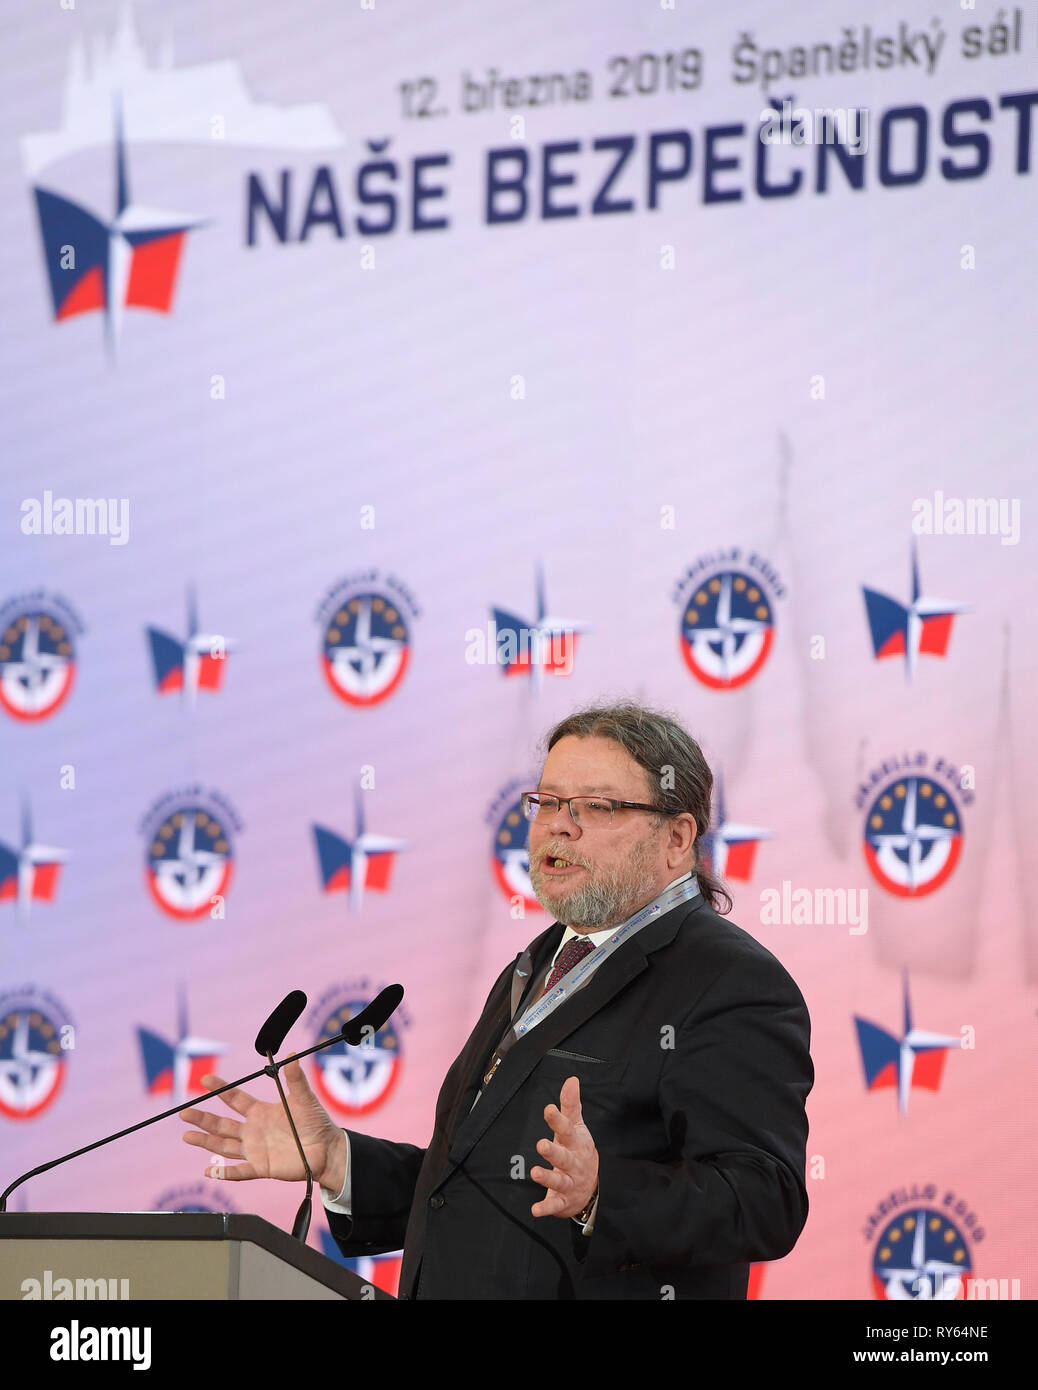 Director of Prague Centre of Transatlantic Relations (PCTR) Alexandr Vondra holds a speech at the conference Our Security Is Not Taken For Granted, held at Prague Castle, Prague, Czech Republic, on Tuesday, March 12, 2019, on the occasion of 20th anniversary of the Czech Republic's joining NATO, to be attended by presidents of Hungary, Poland and Slovakia, Janos Ader, Andrzej Duda and Andrej Kiska, defence and foreign ministers of Visegrad Four, current and former senior officials of NATO and USA, diplomatic corps. (CTK Photo/Ondrej Deml) Stock Photo